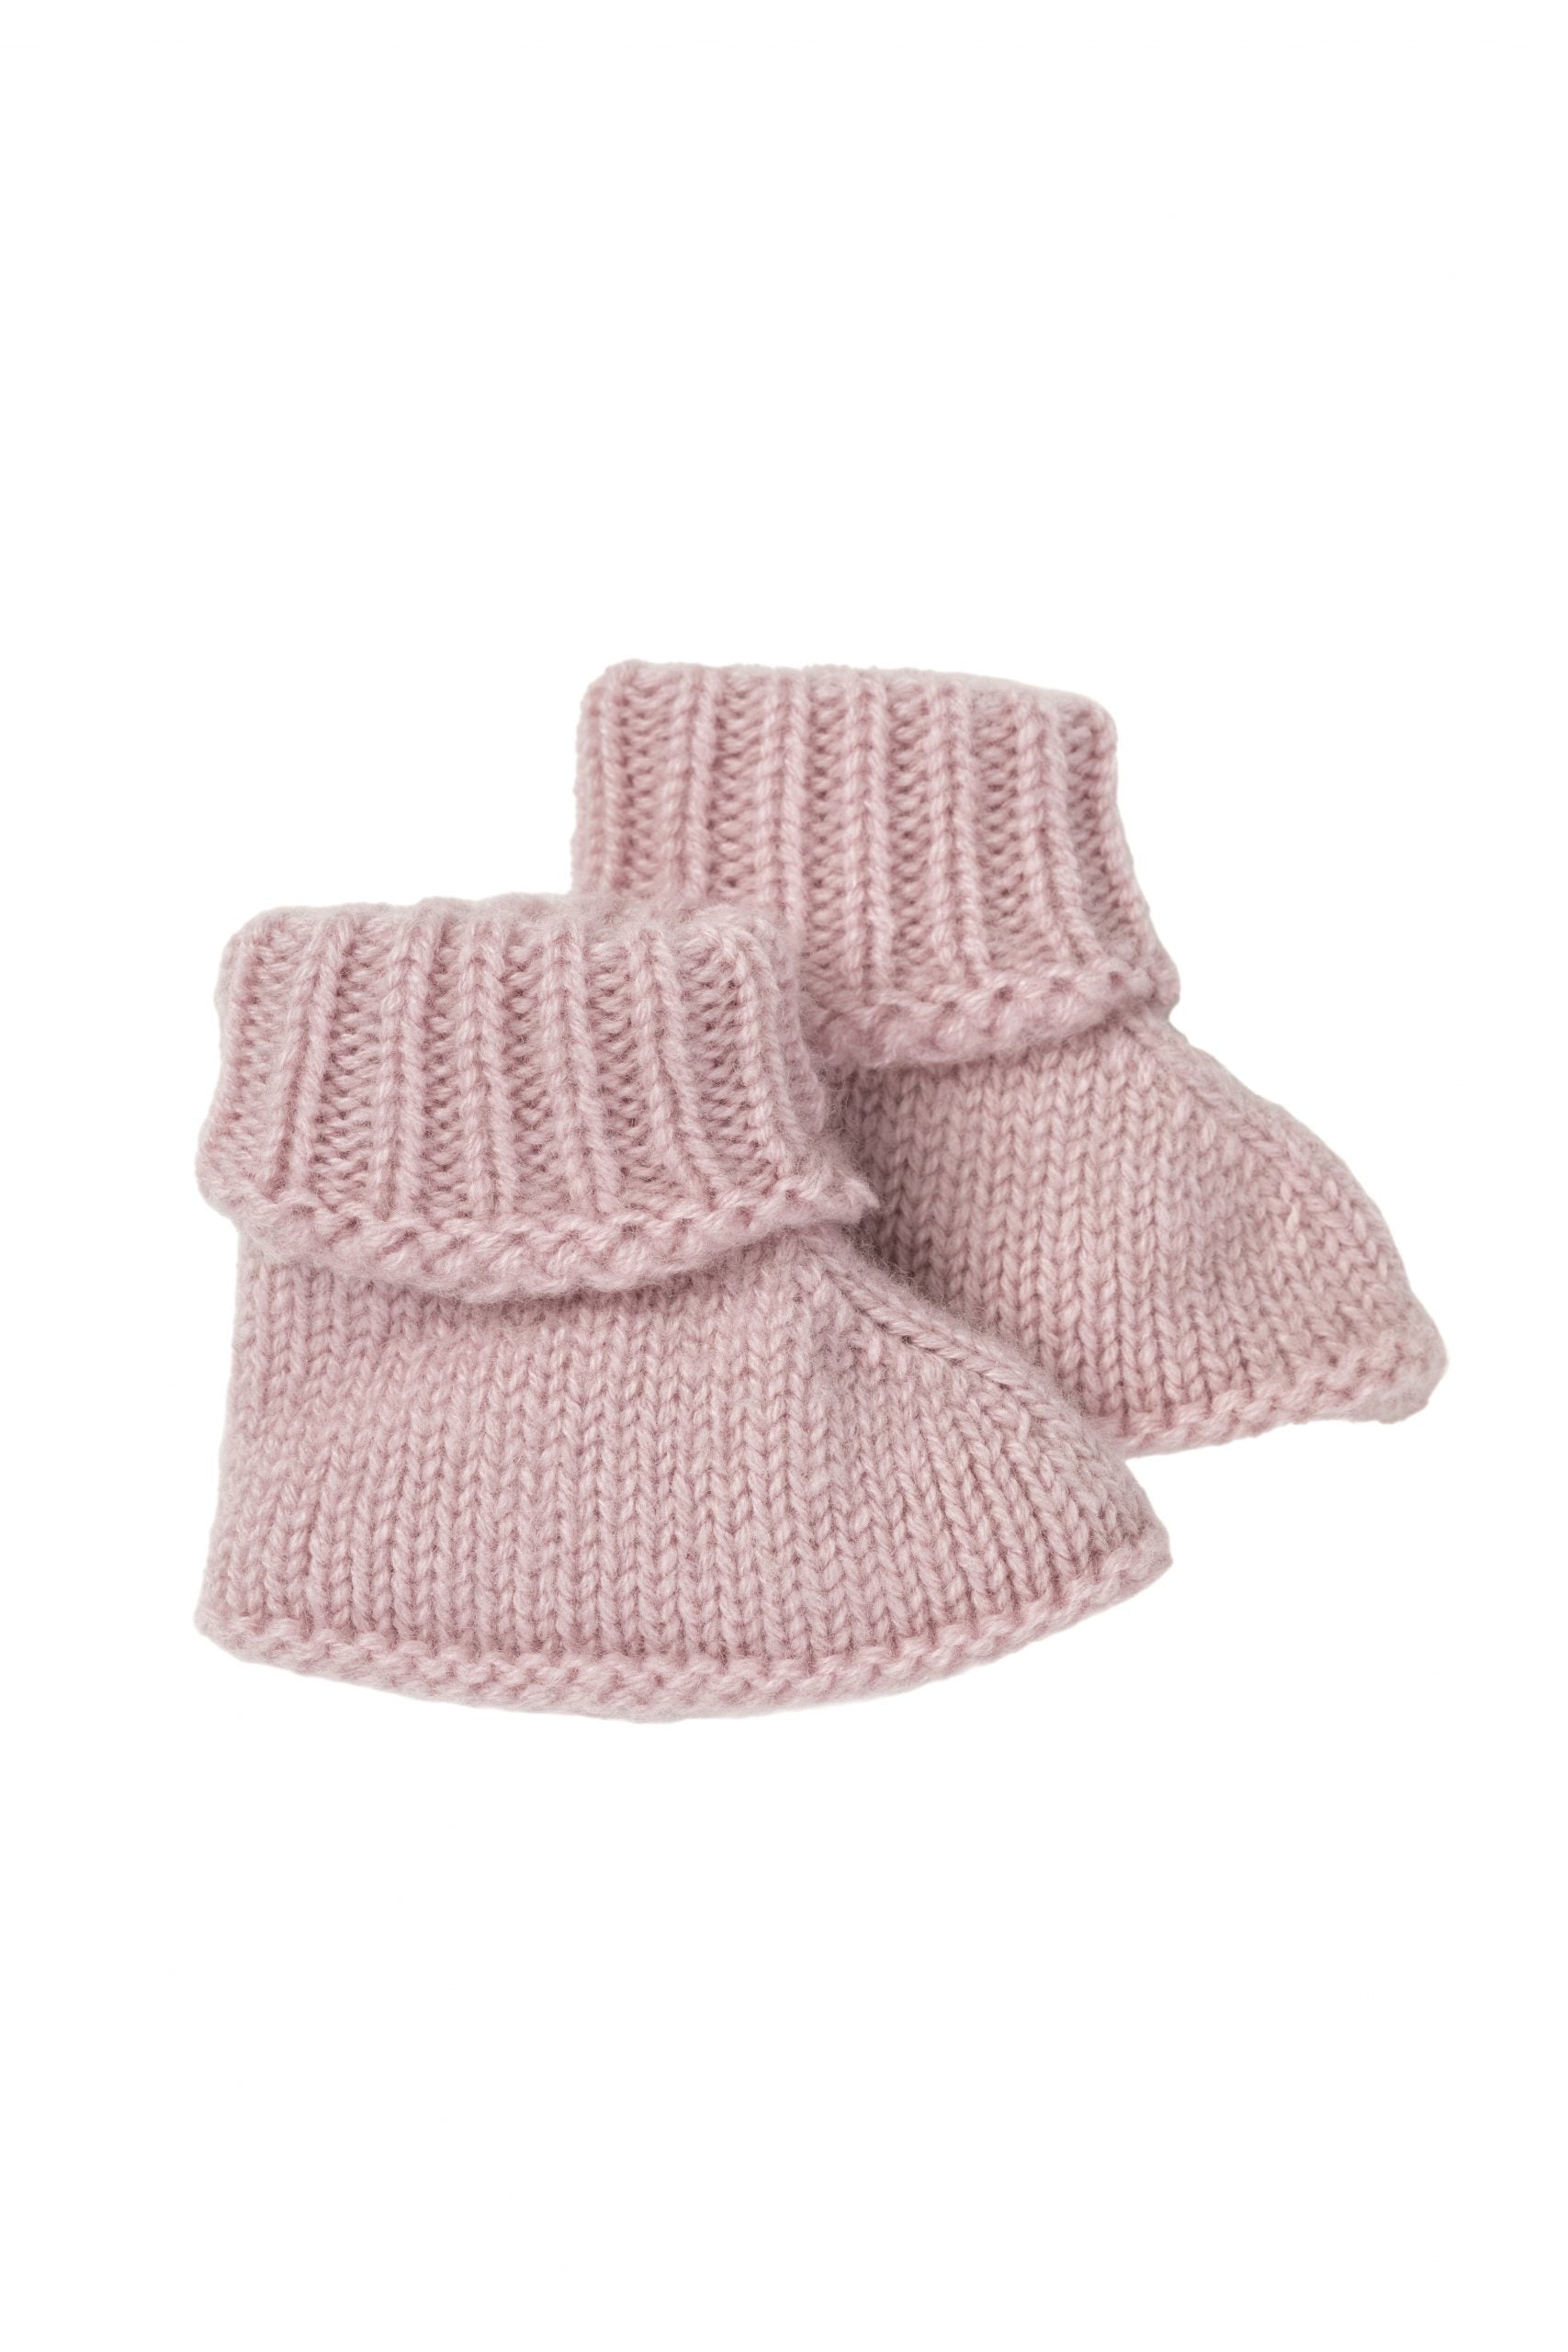 Cashmere Baby Bootees Rose Pink 0-3 Months